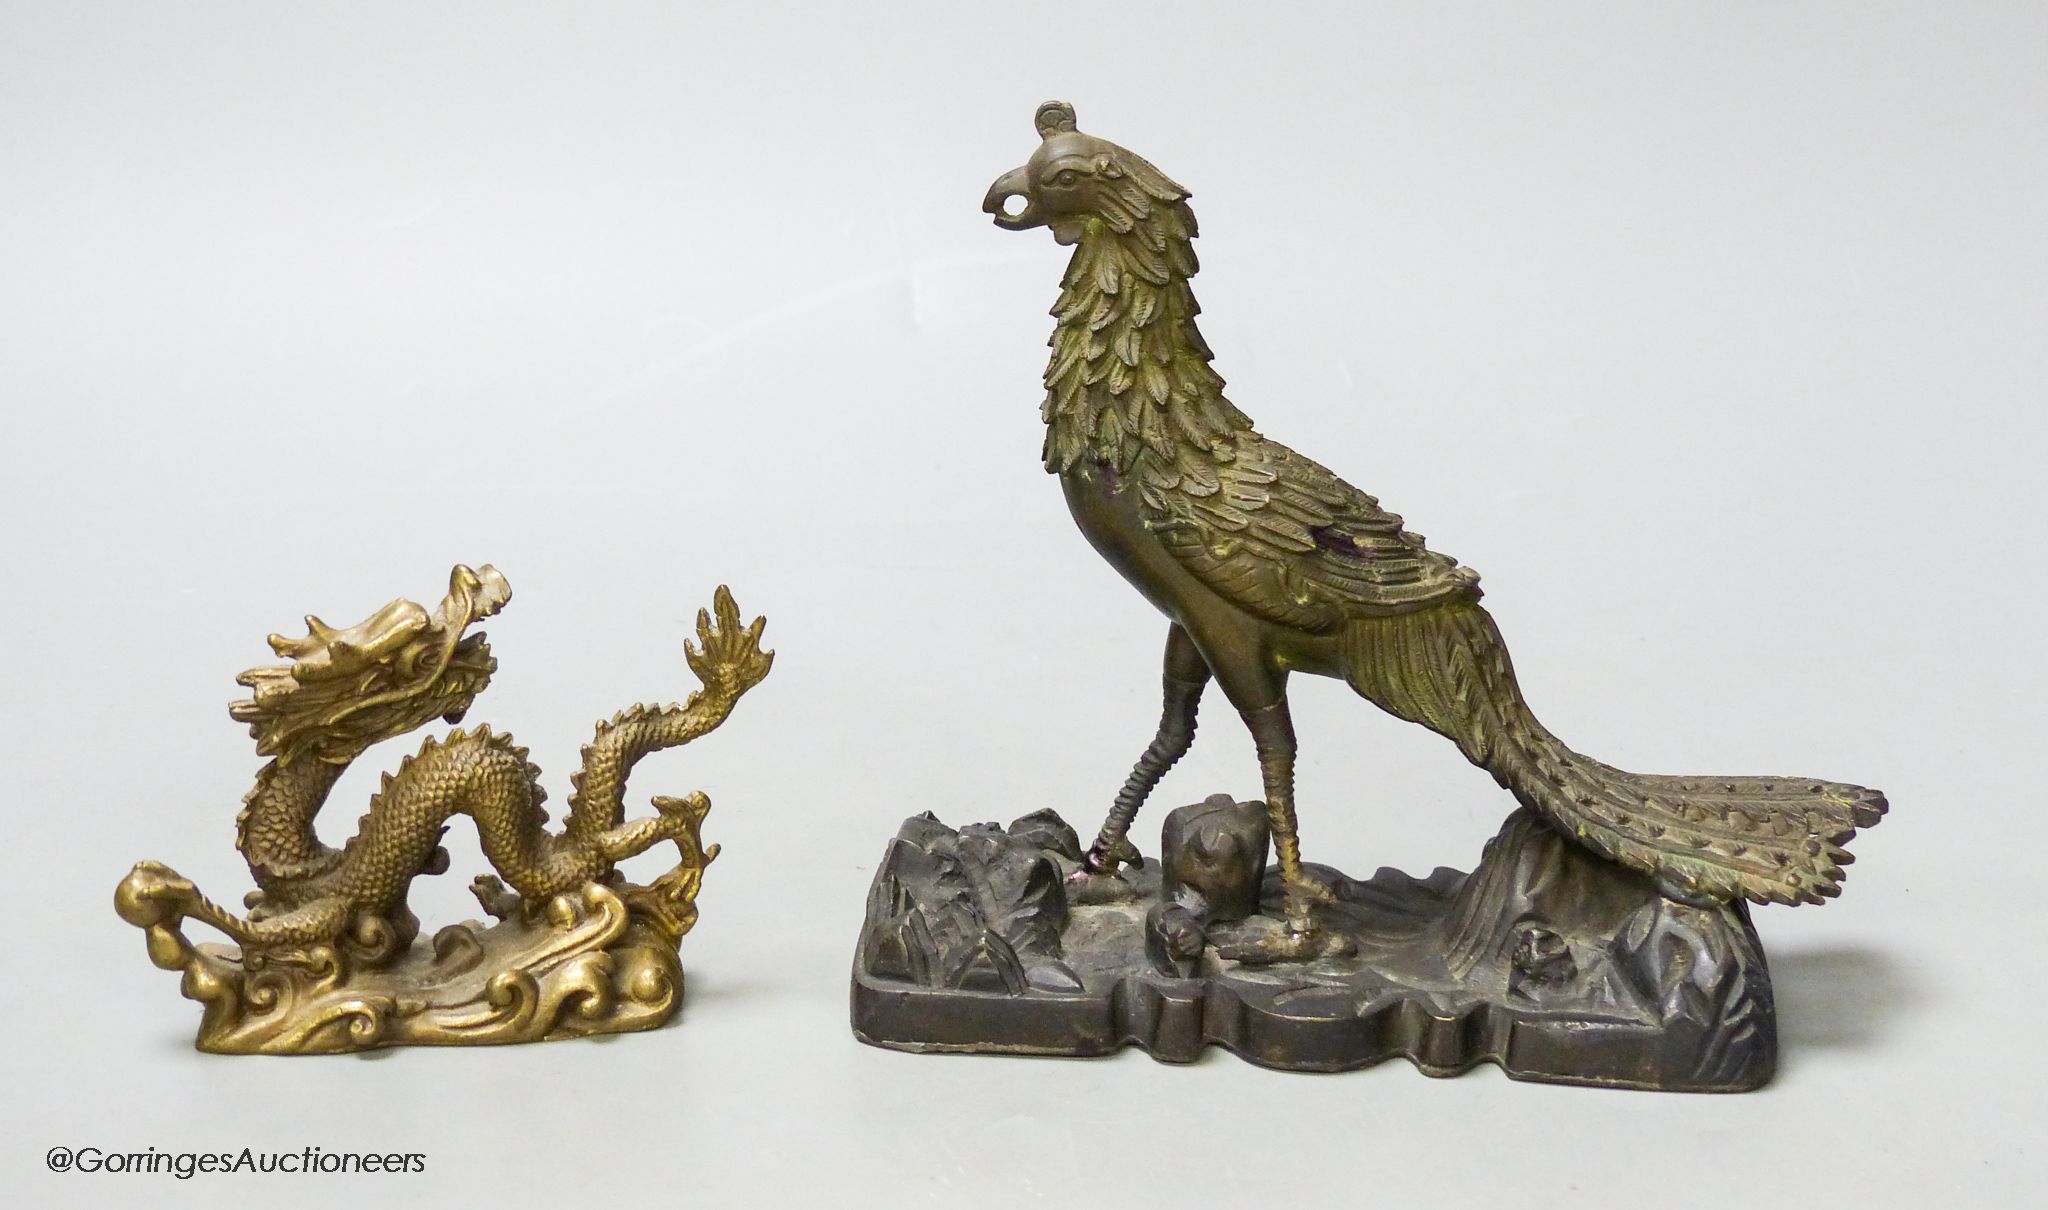 A 19th century Chinese bronze figure of a phoenix, repairs, and a 20th century Chinese bronze figure of a dragon, tallest 13.5cm